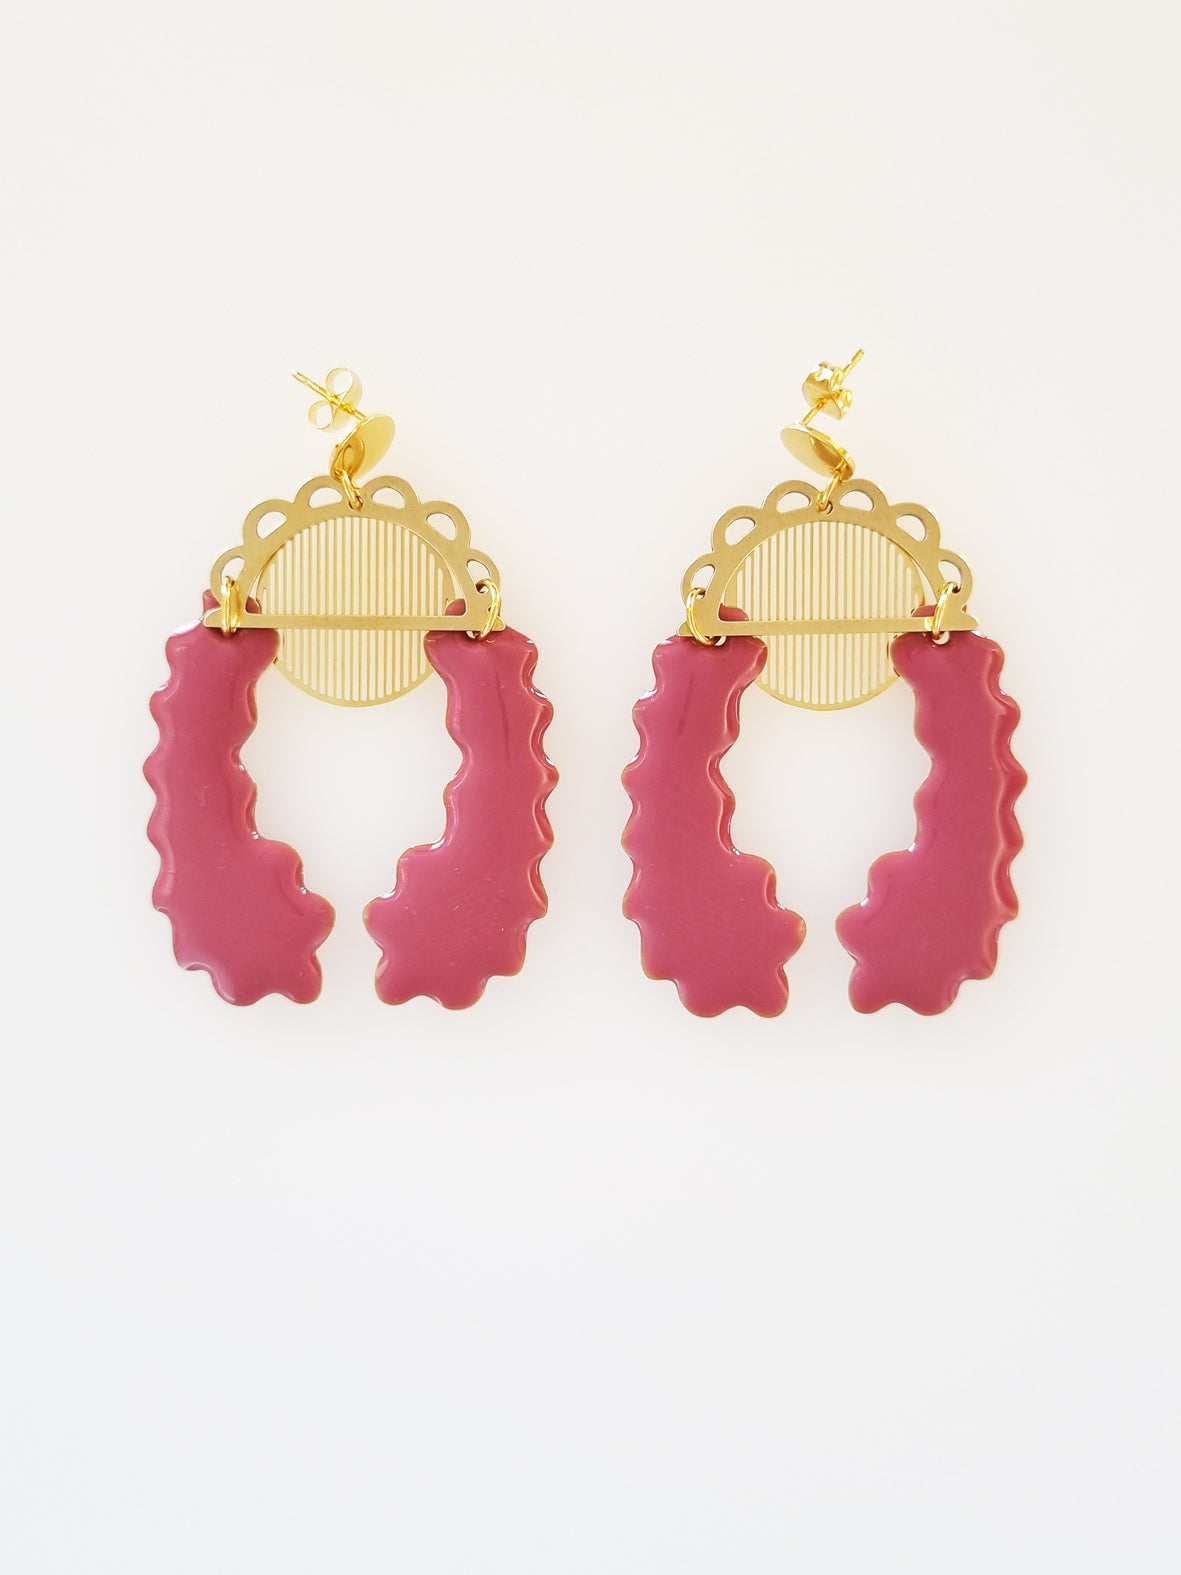 A pair of stud dangle earrings lay on a white background. Both earrings feature a semi circle piece of brass with scalloped detailing around the top curve. Behind that is a delicate circle piece of brass with thin lines cut vertically. A long plum piece of enamel that has wavy edges is connected to the left of the brass semi-circle with a jump ring. A second enamel piece in the same shape is mirrored and connected to the right side of the brass semi-circle.